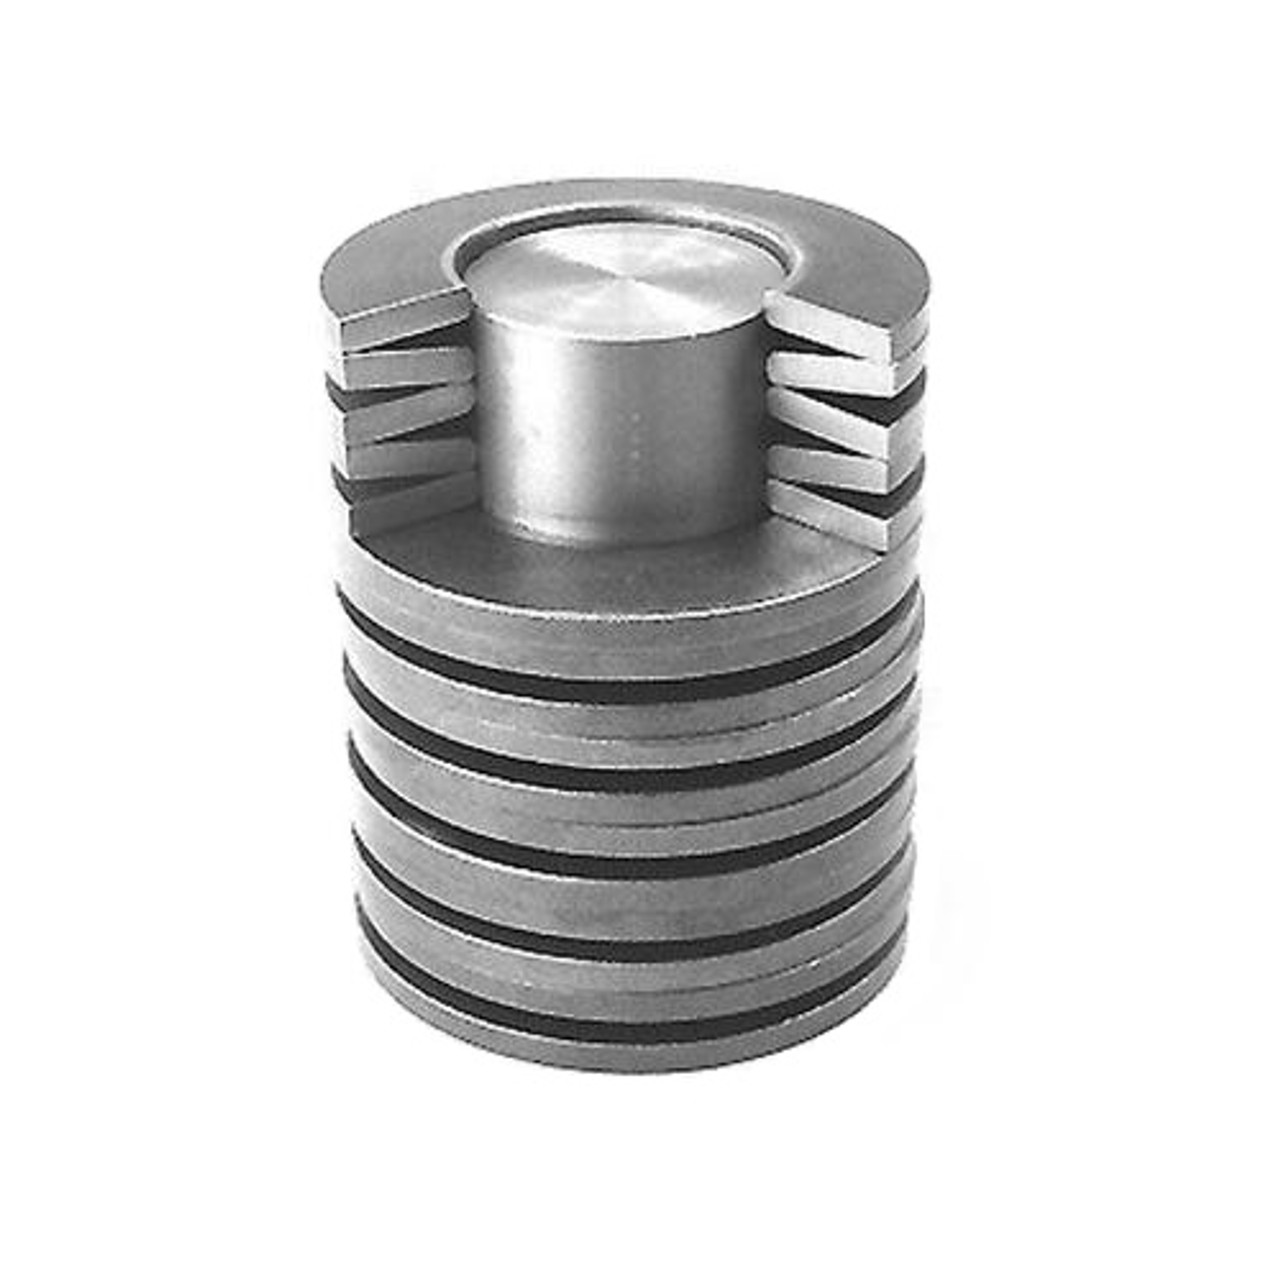 50mm Disc Spring (DIN 2093) Conical Washer  DS051.0-100-05